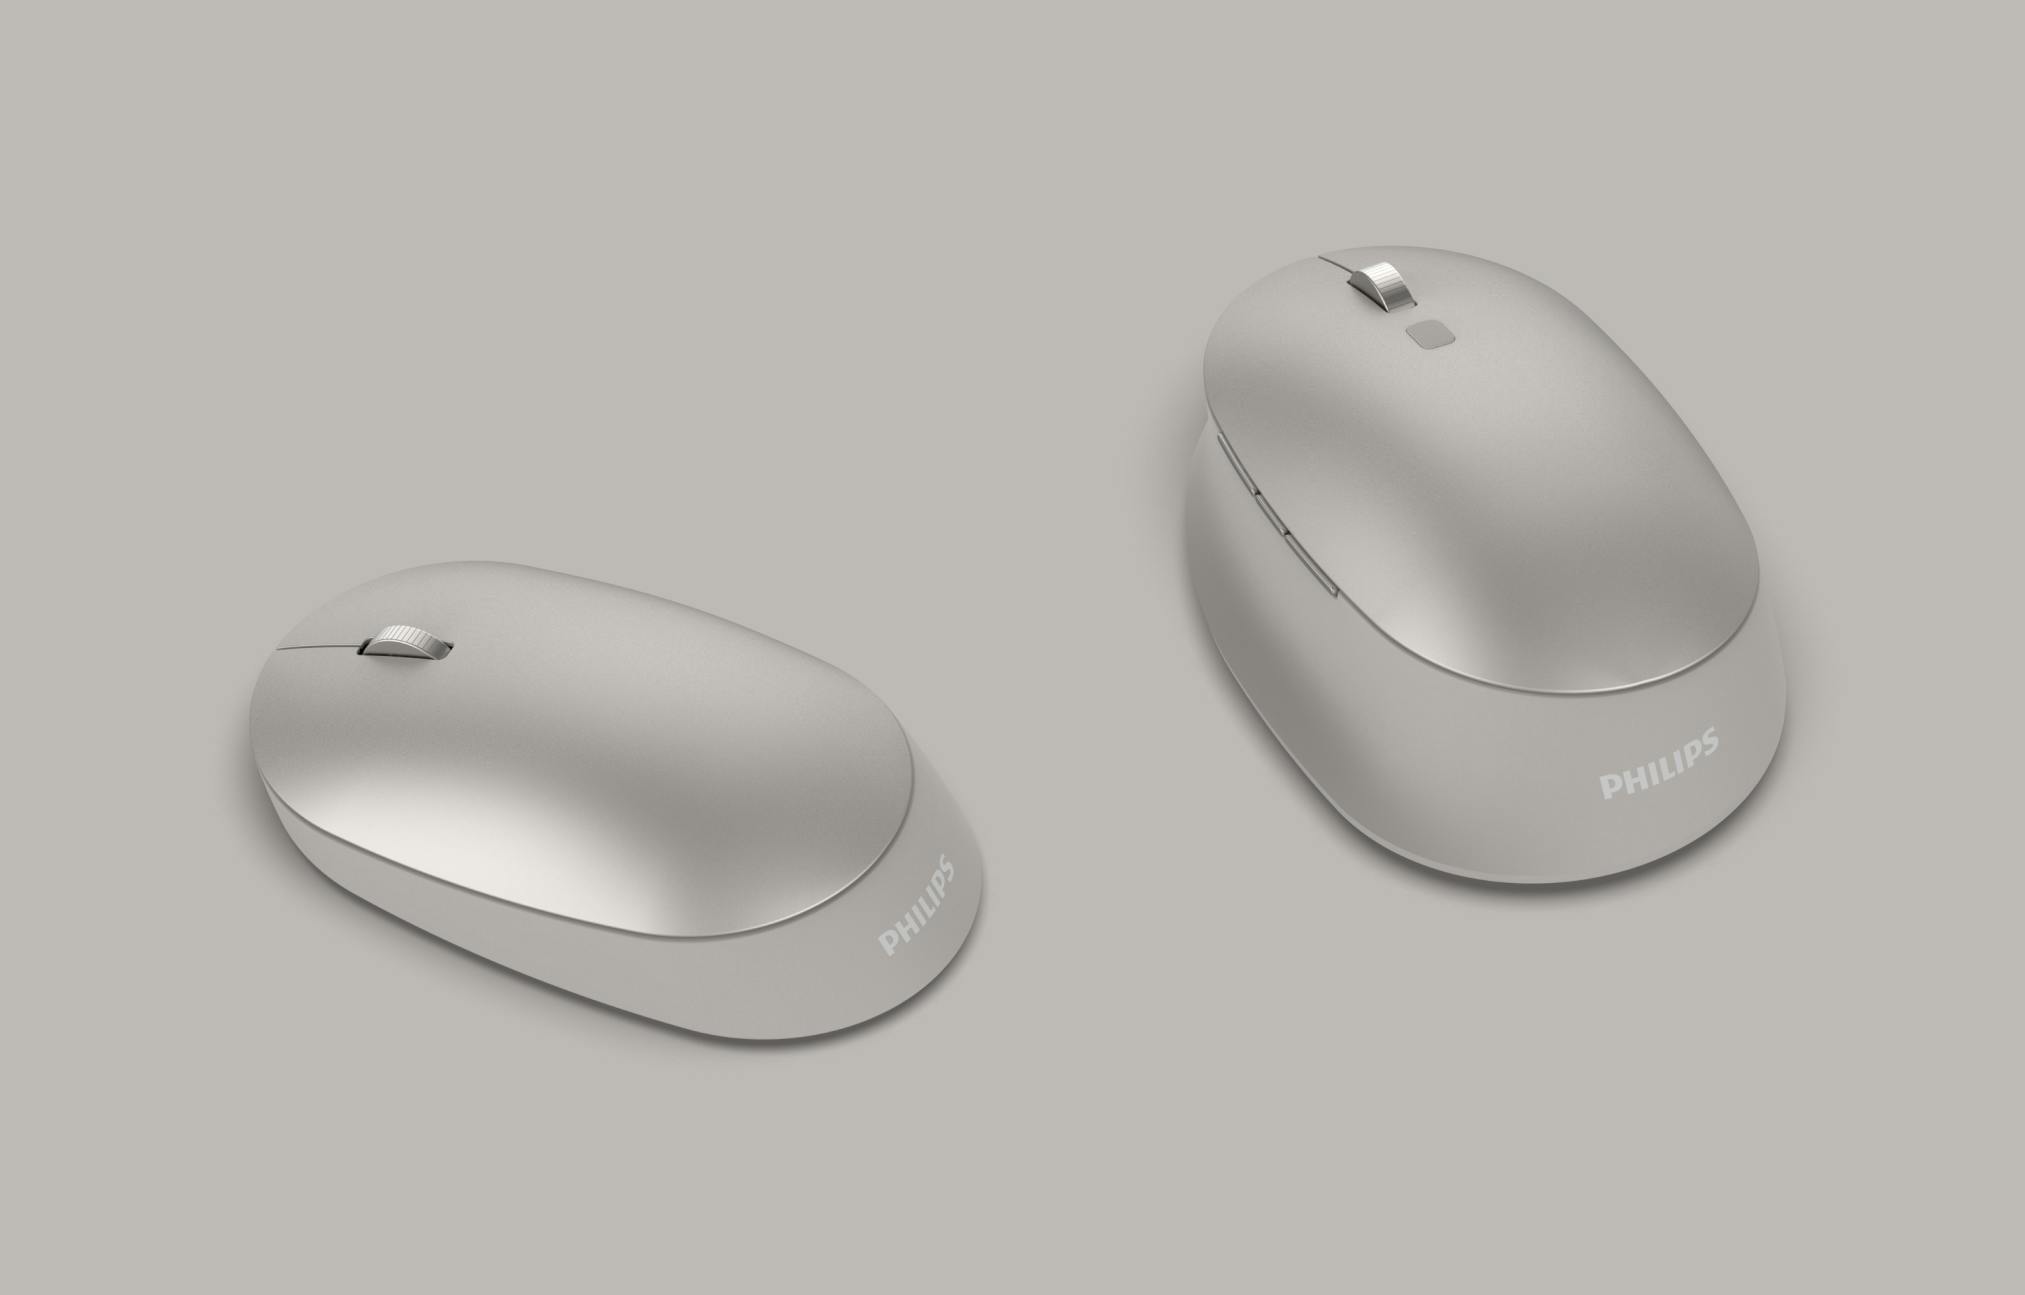 Philips mouse